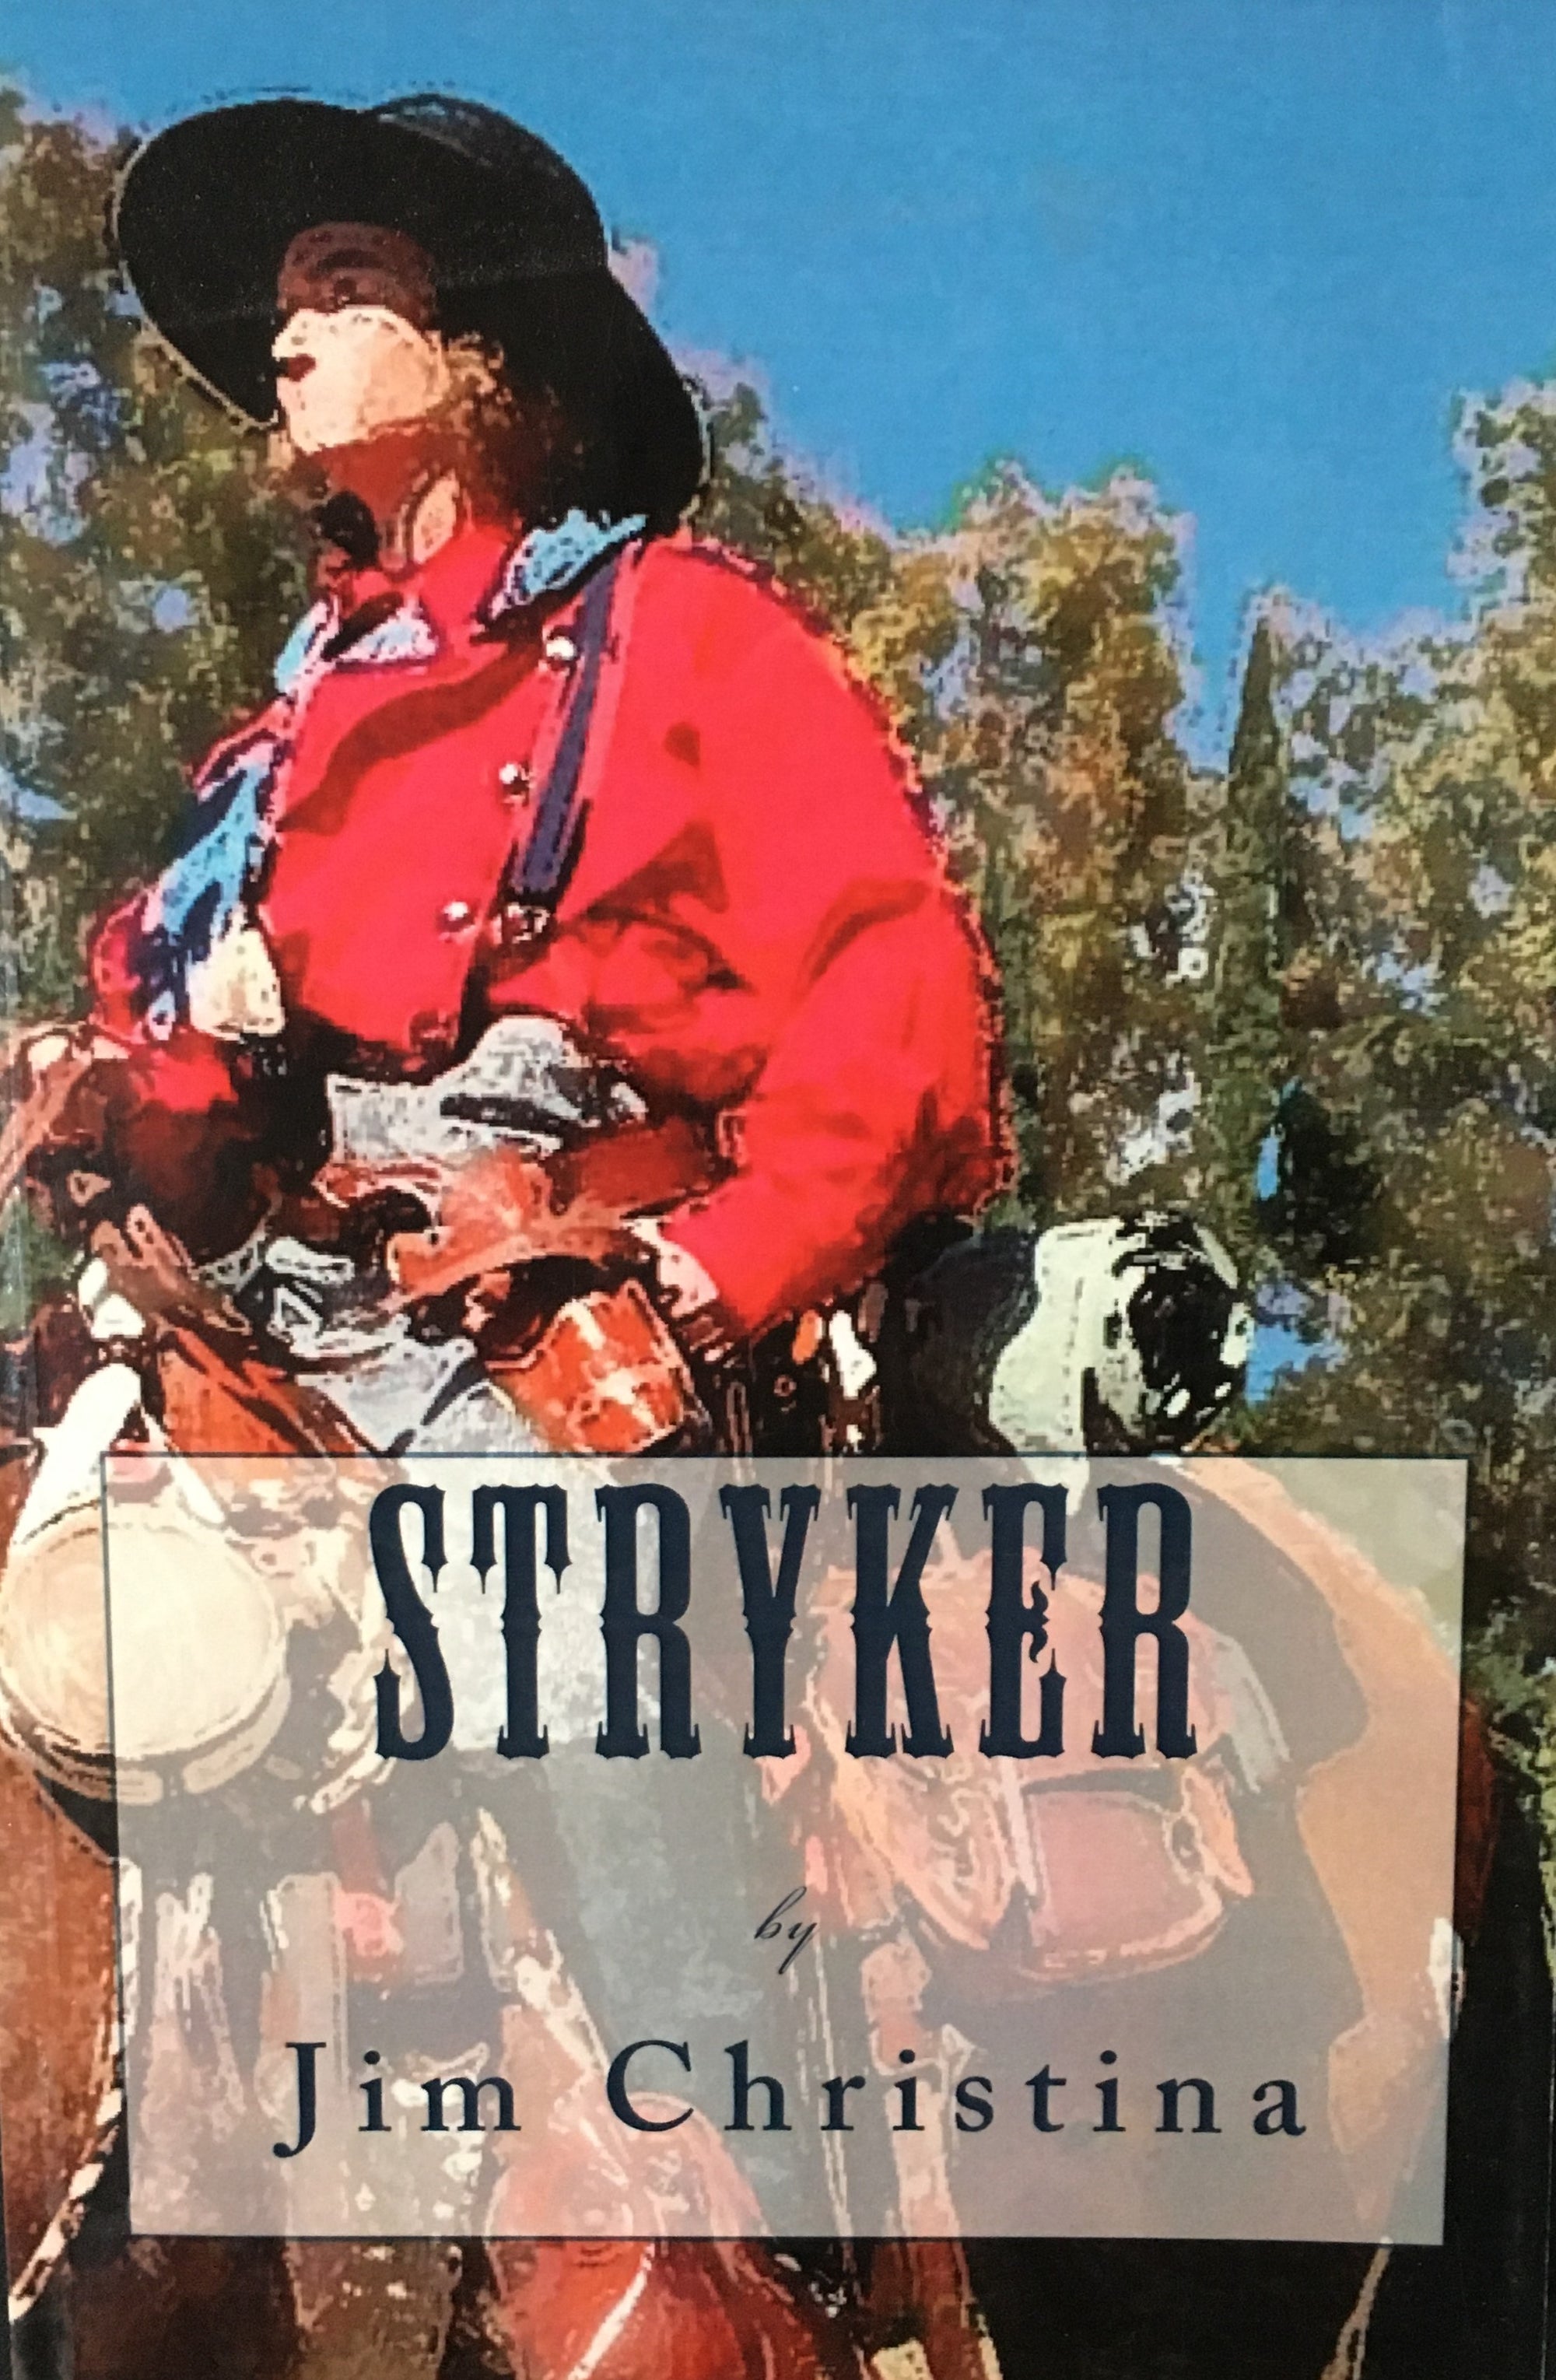 Stryker by Jim Christina Book Cover